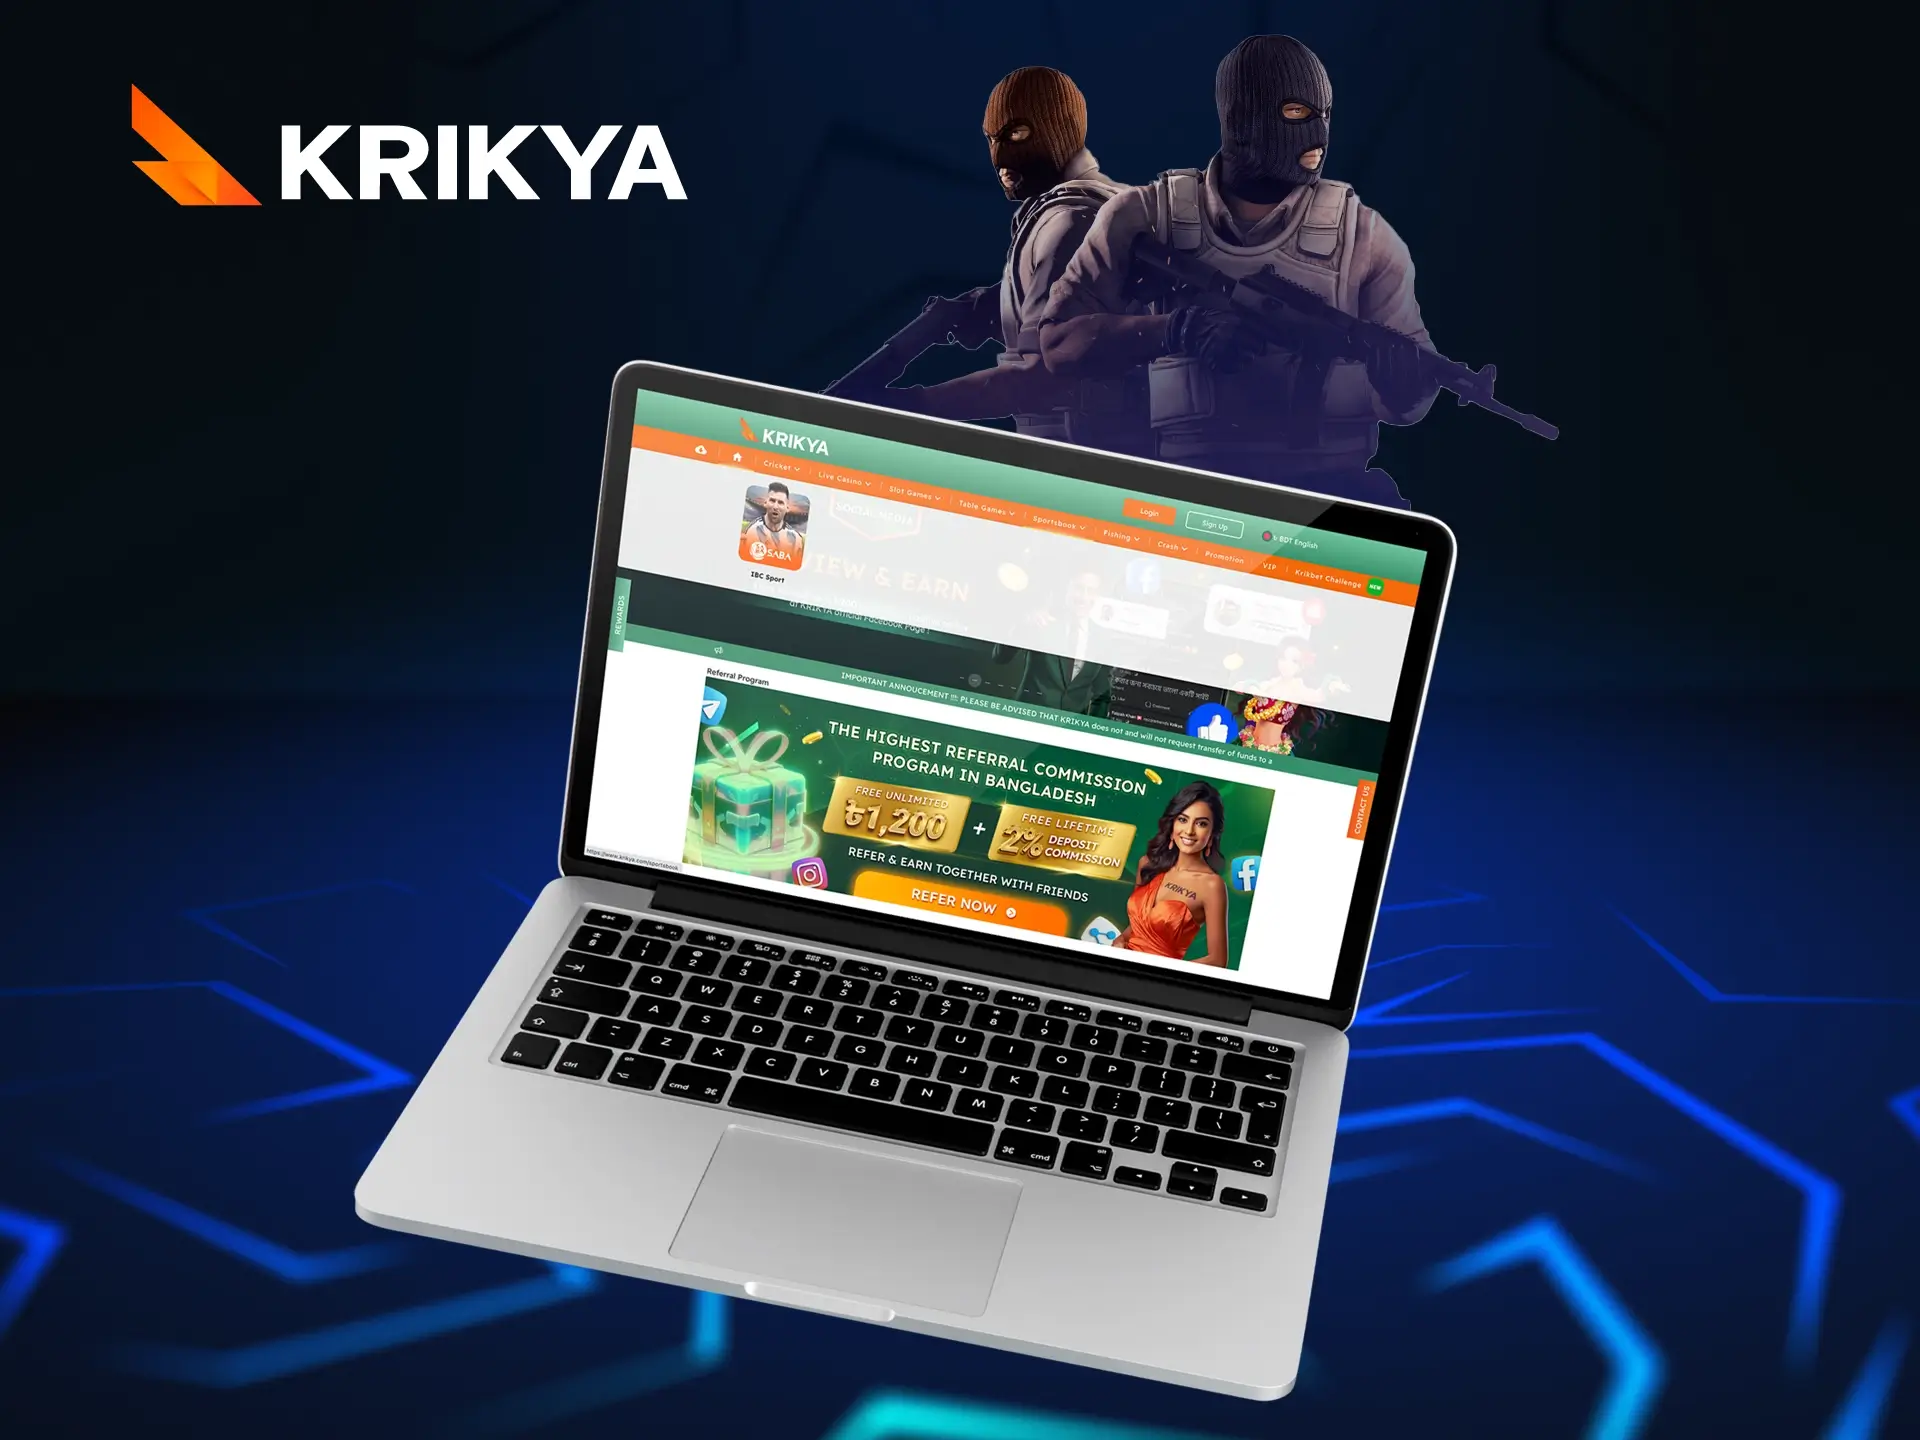 Dota 2, Valorant, CS:GO all these disciplines are available at Krikya.